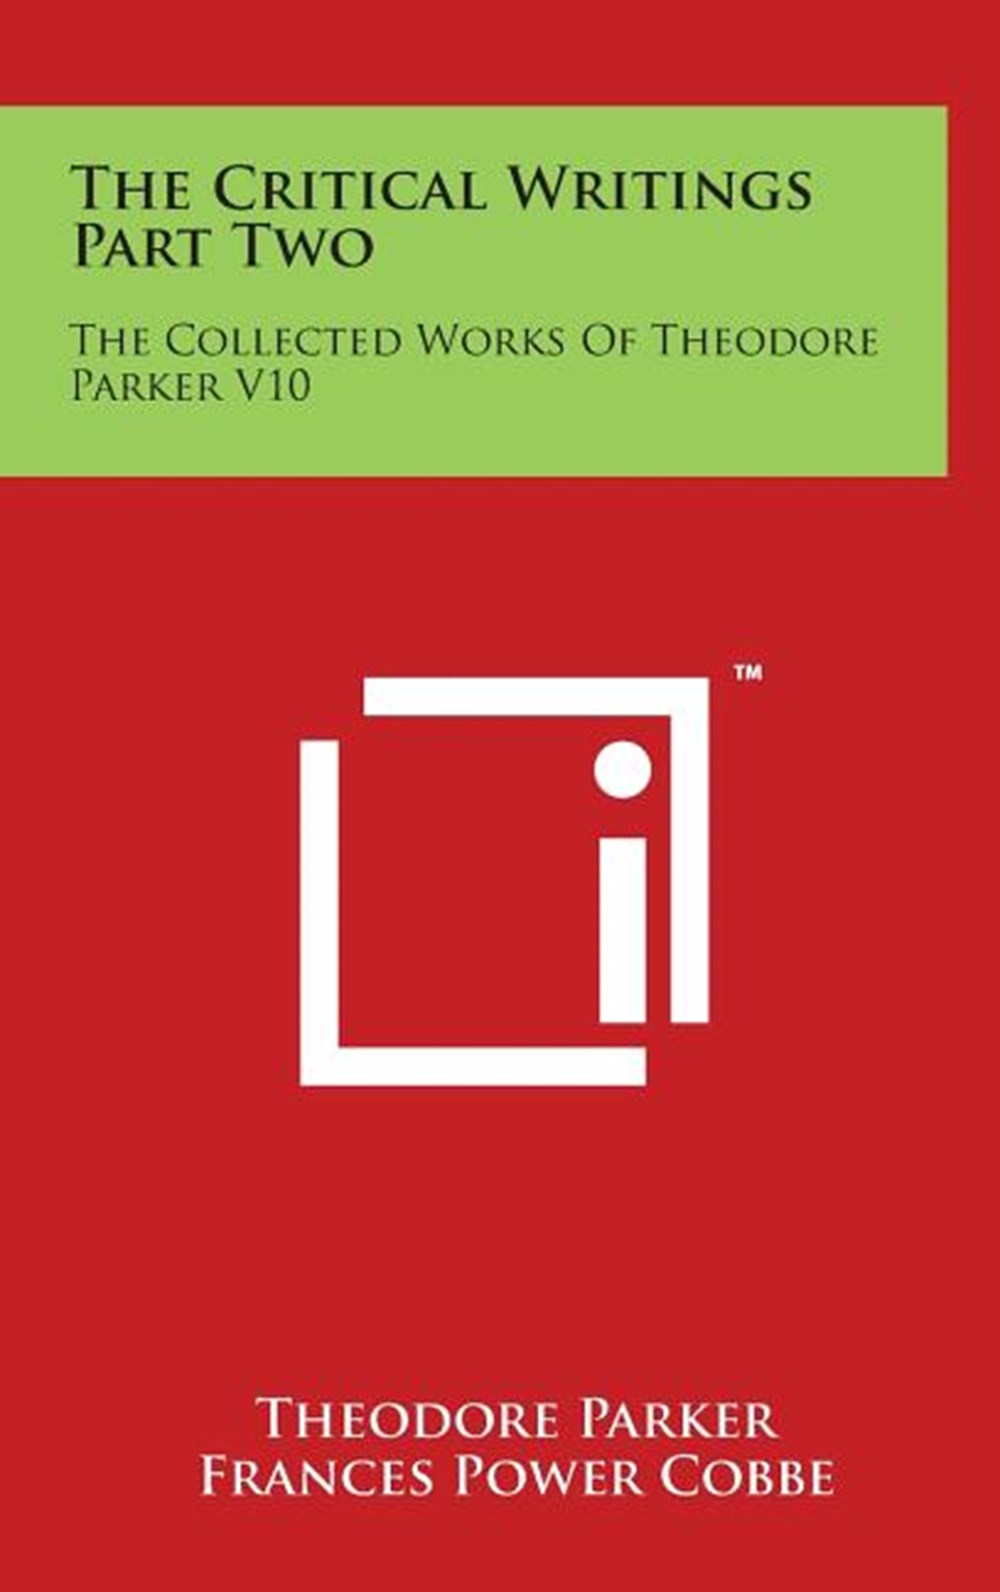 Critical Writings Part Two: The Collected Works of Theodore Parker V10